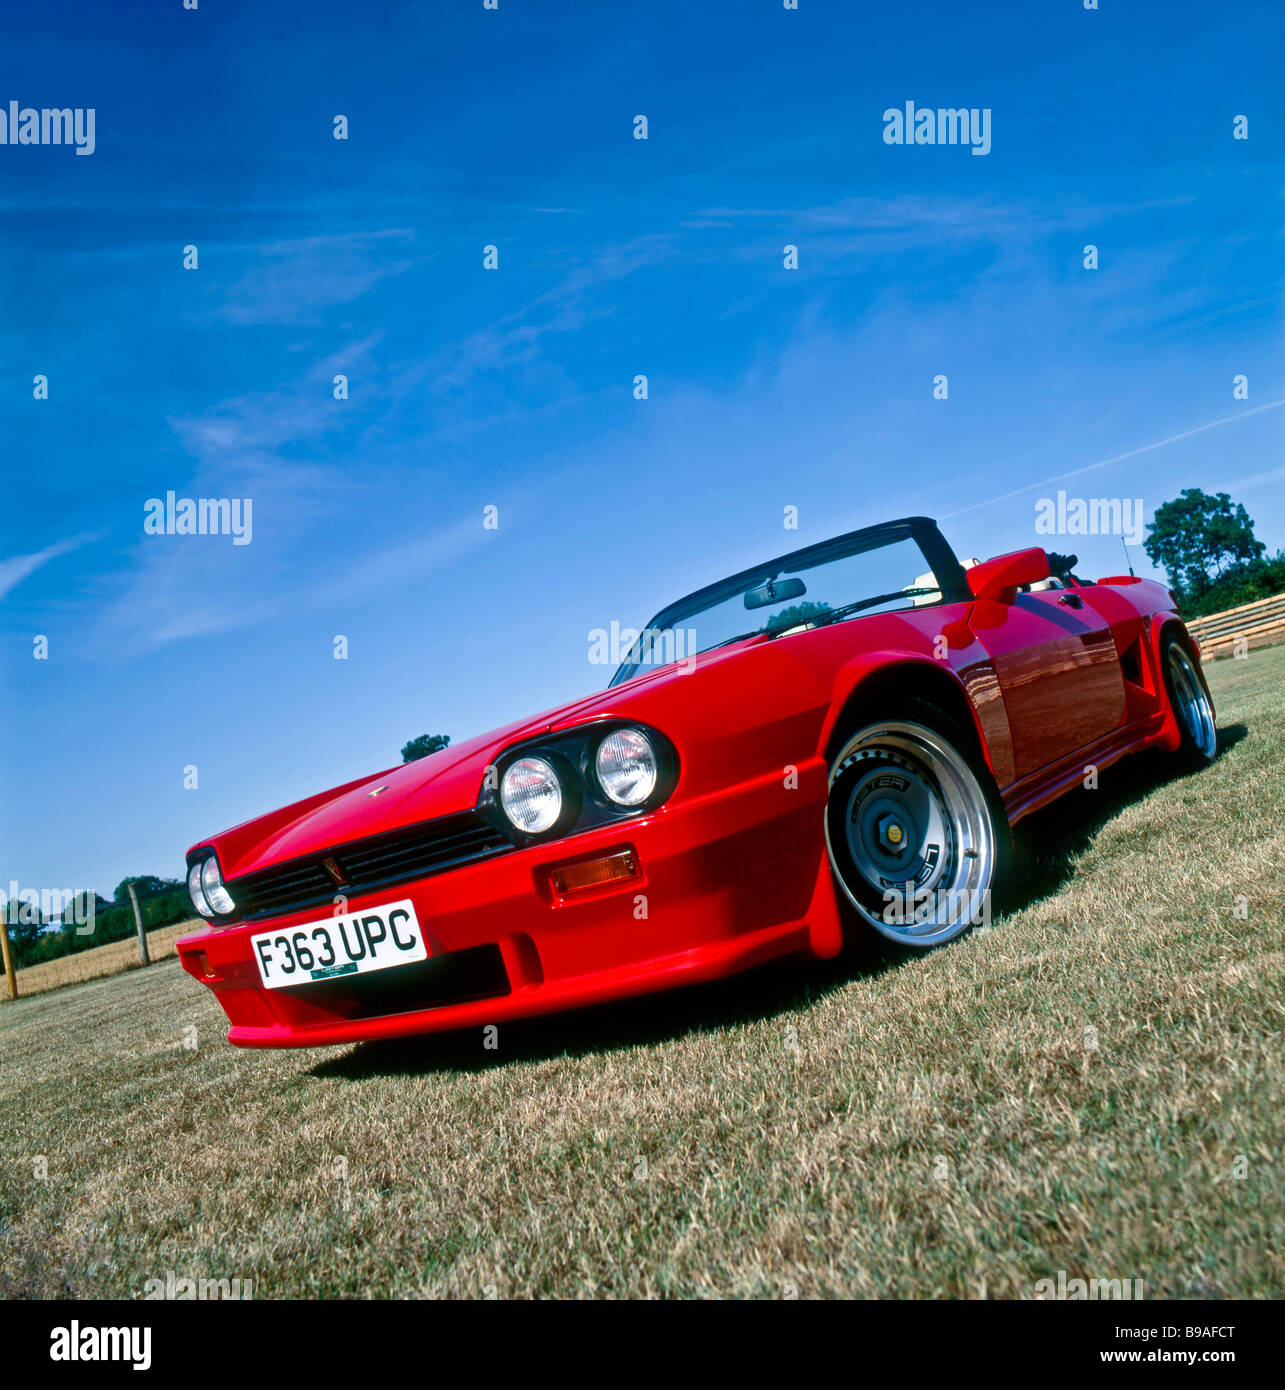 Jaguar Lister XJS Le Mans sports convertible 7.0 litre V12. Photographed in an English rural setting with deep blue summer sky. c.1989 Stock Photo